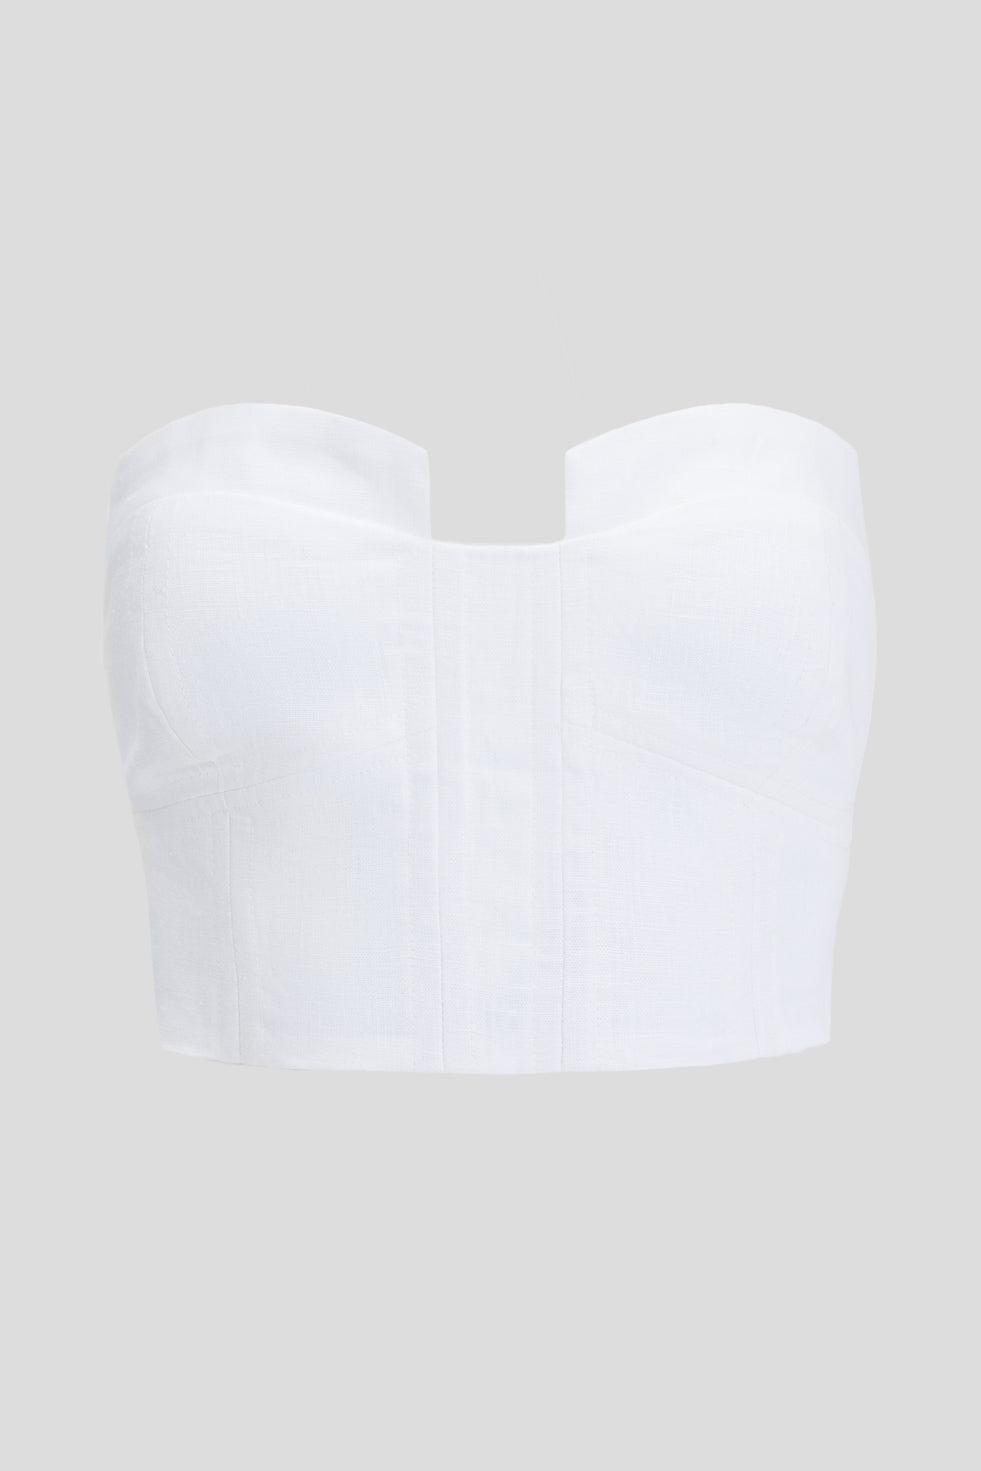 Cami  White Linen structured corset top